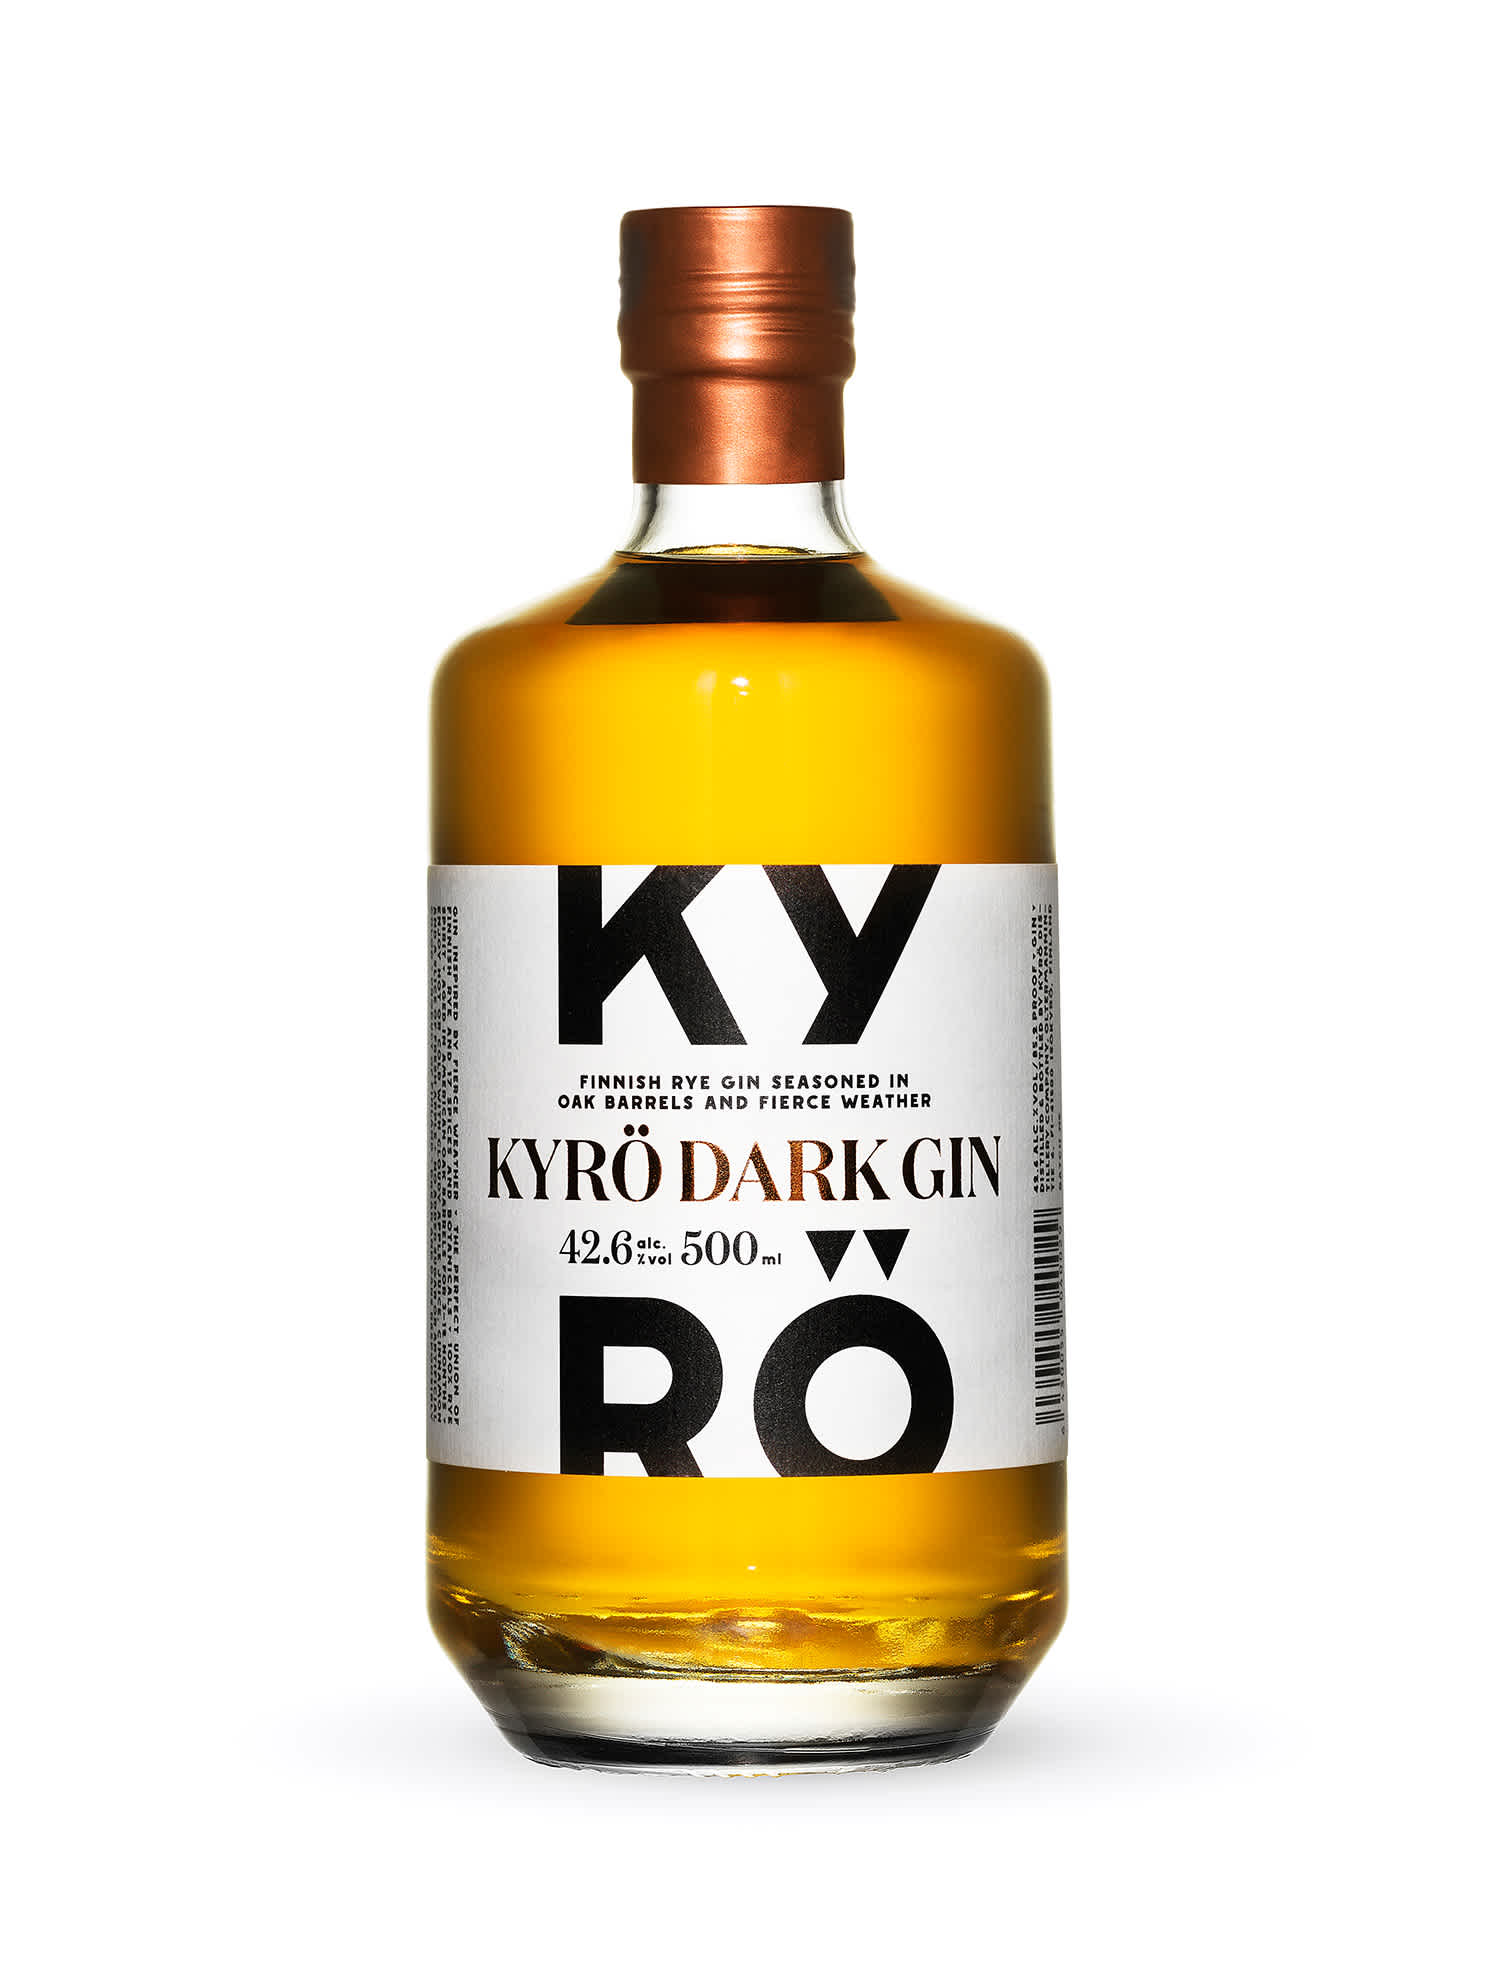 Product photo: a 500ml clear bottle of Kyrö Gin, which is a dark, nutty brown, made by the Kyrö Distillery Company in Isokyrö, Finland. 